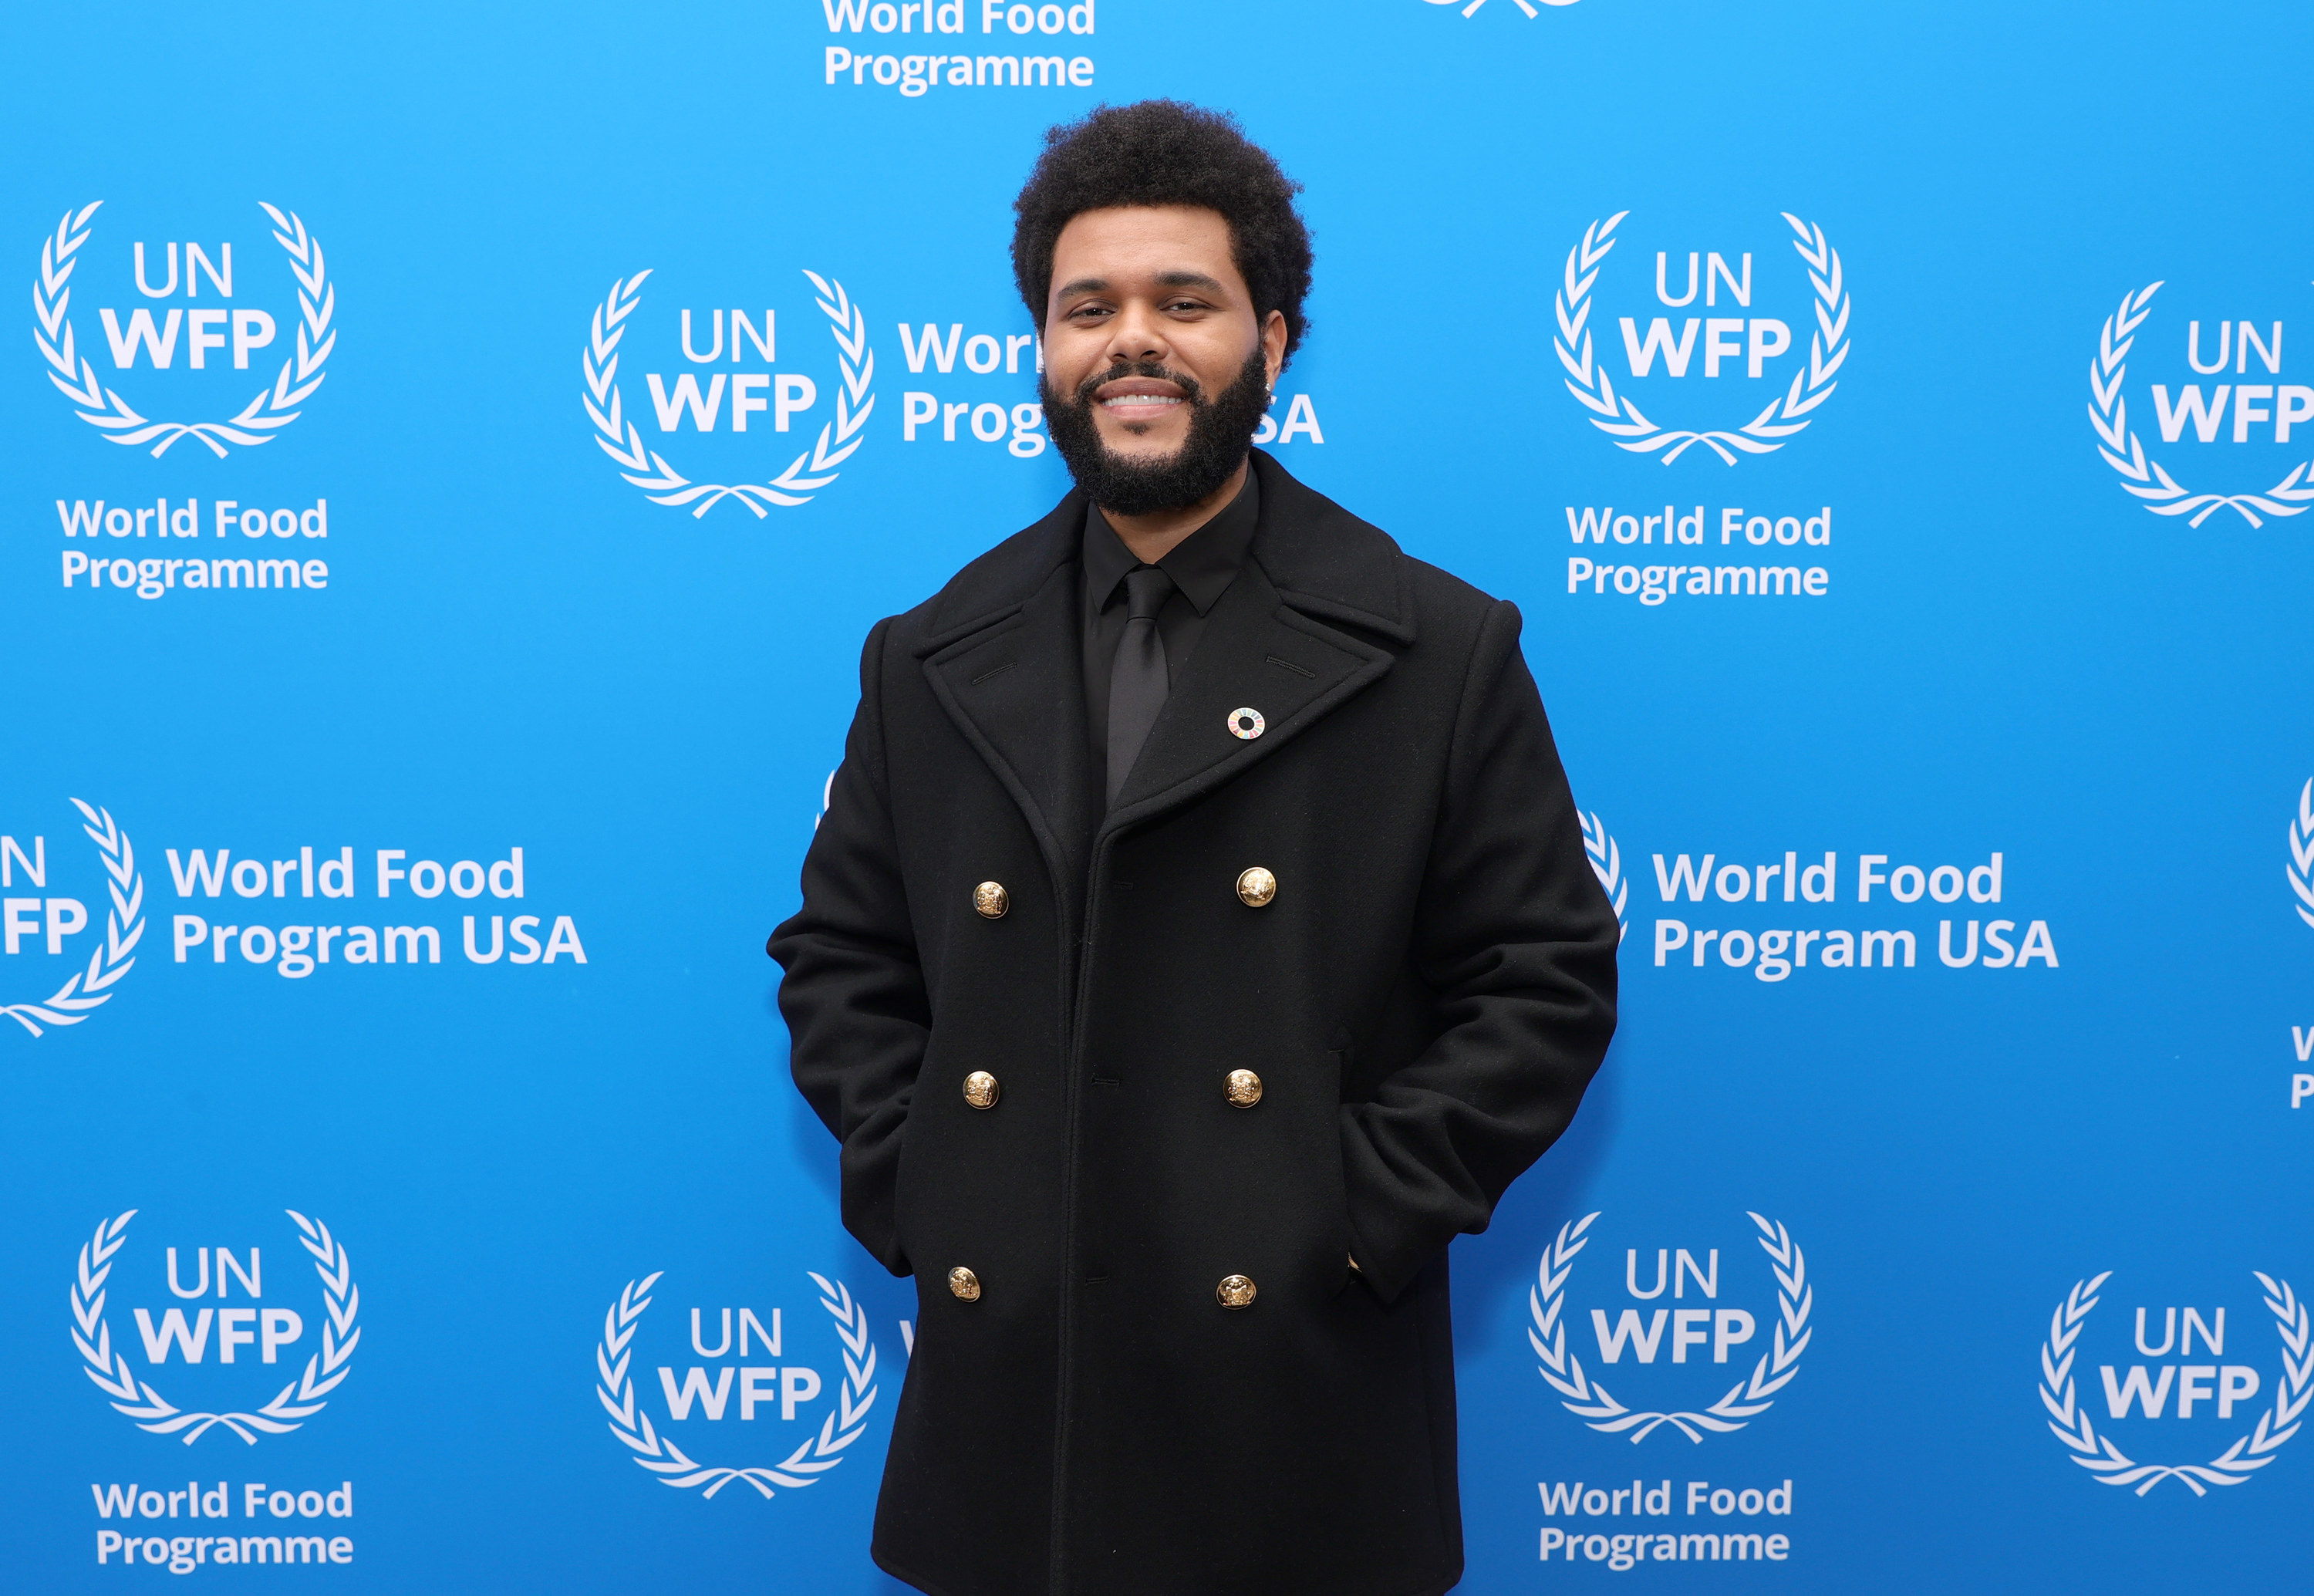 The Weeknd smiling in a peacoat